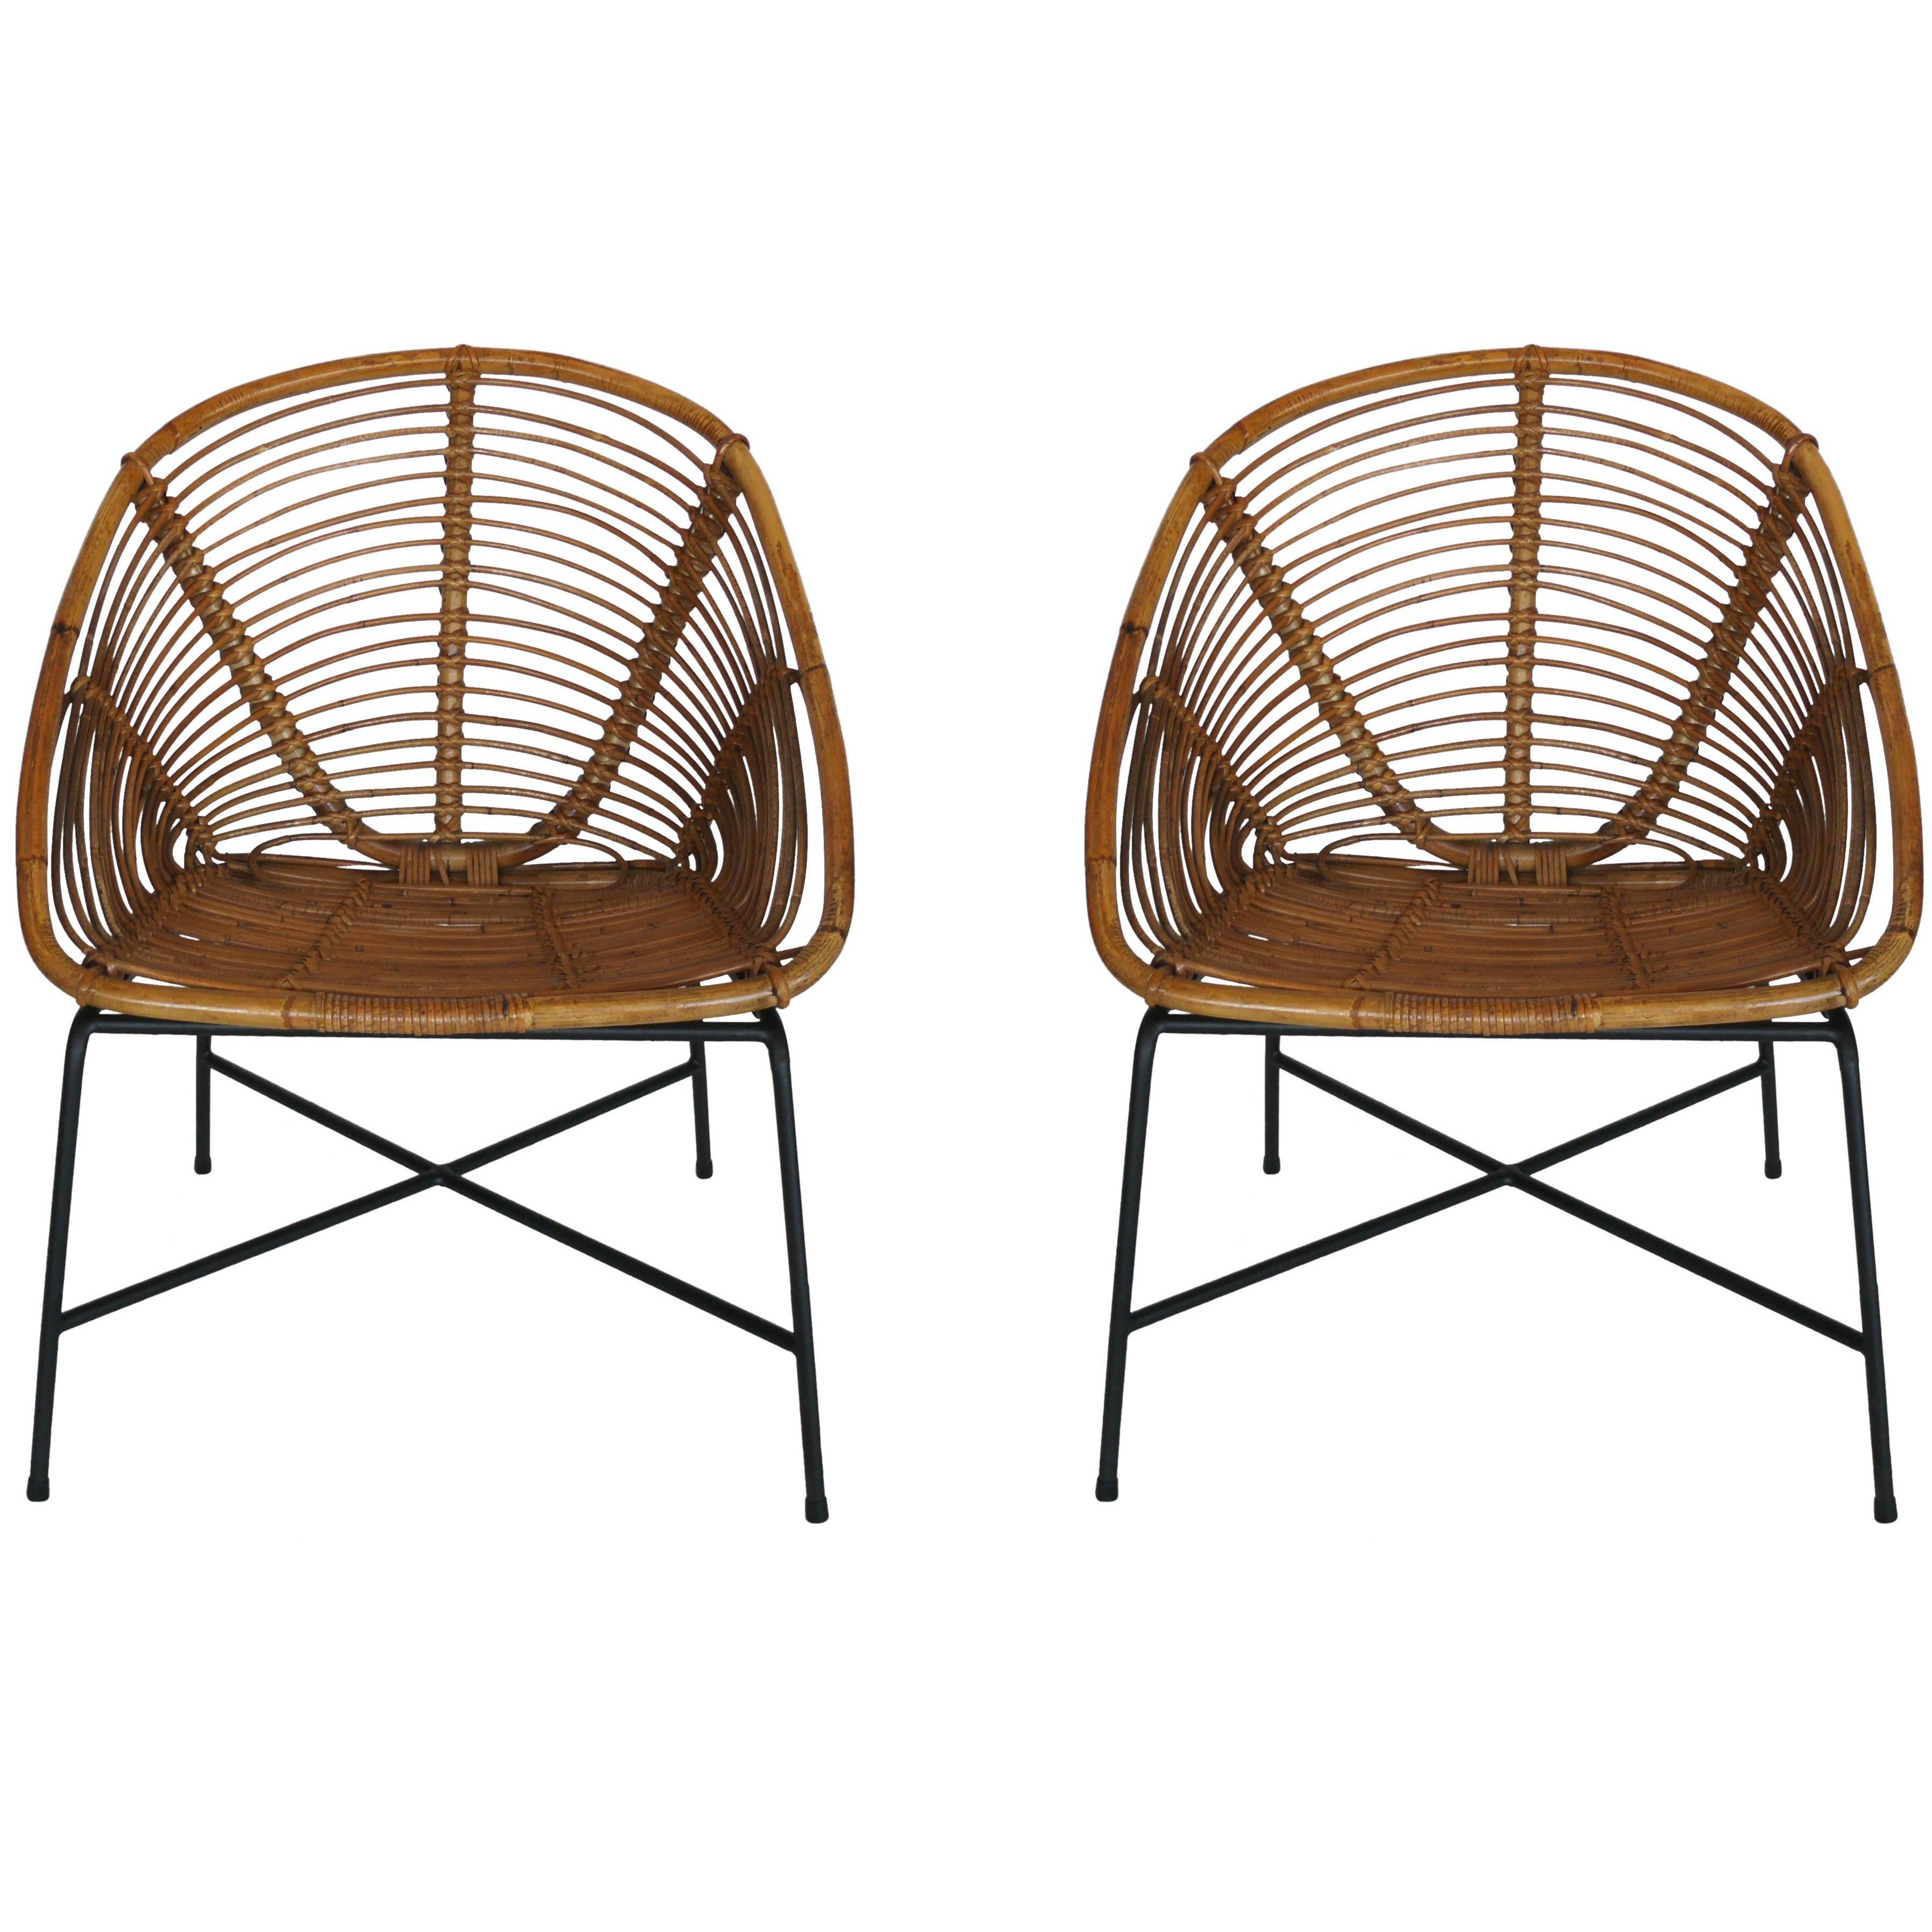 French Rattan Chairs